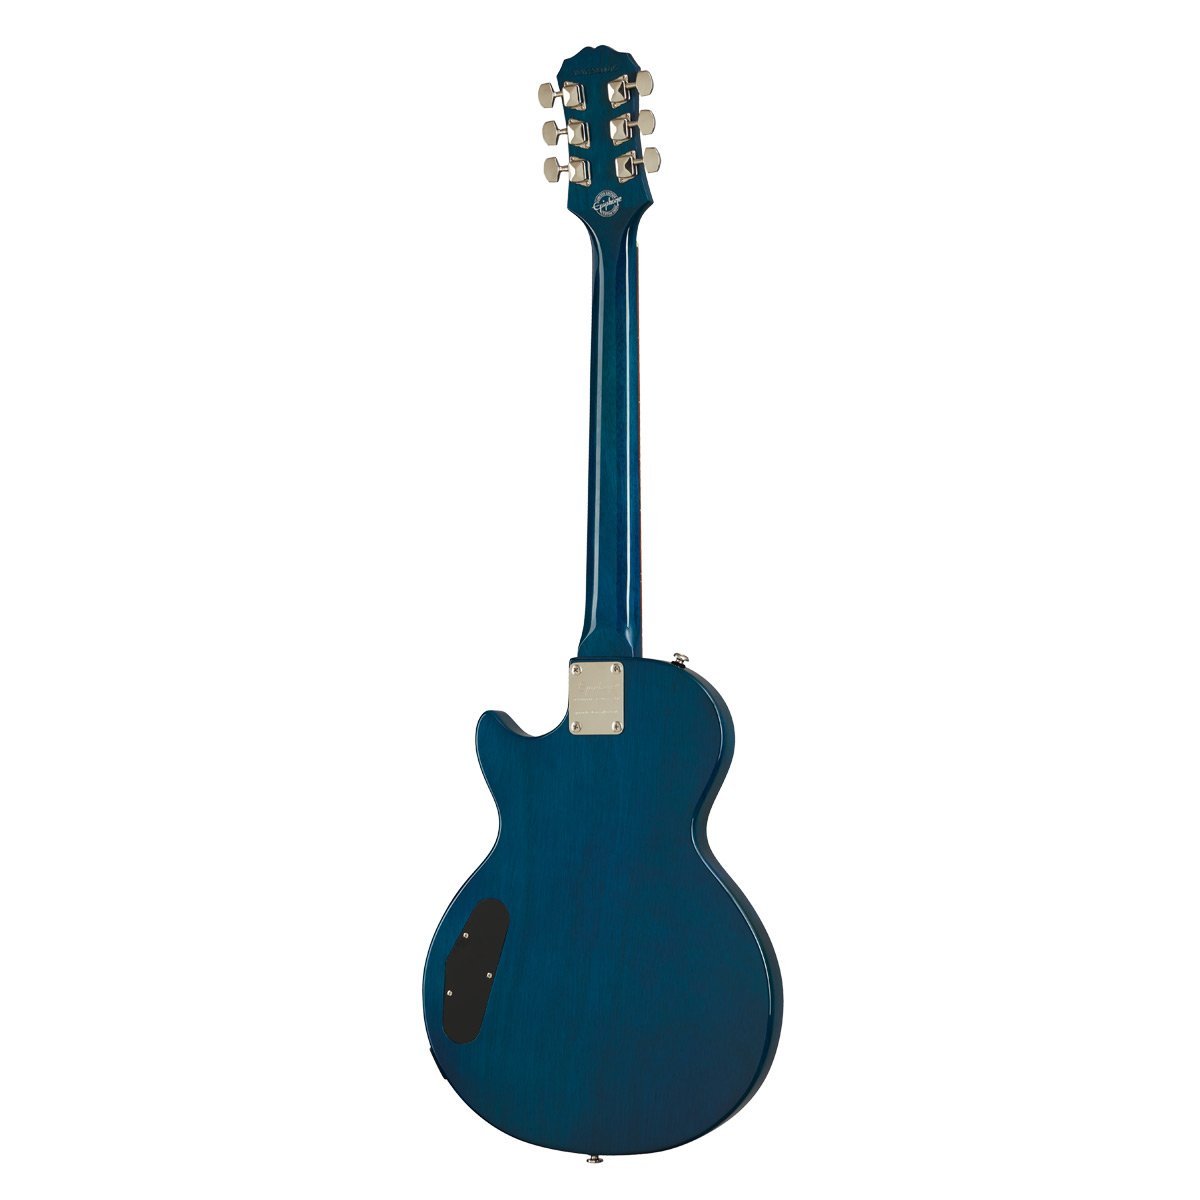 Epiphone Limited Edition Les Paul Special-II Plus Top Trans Blue 